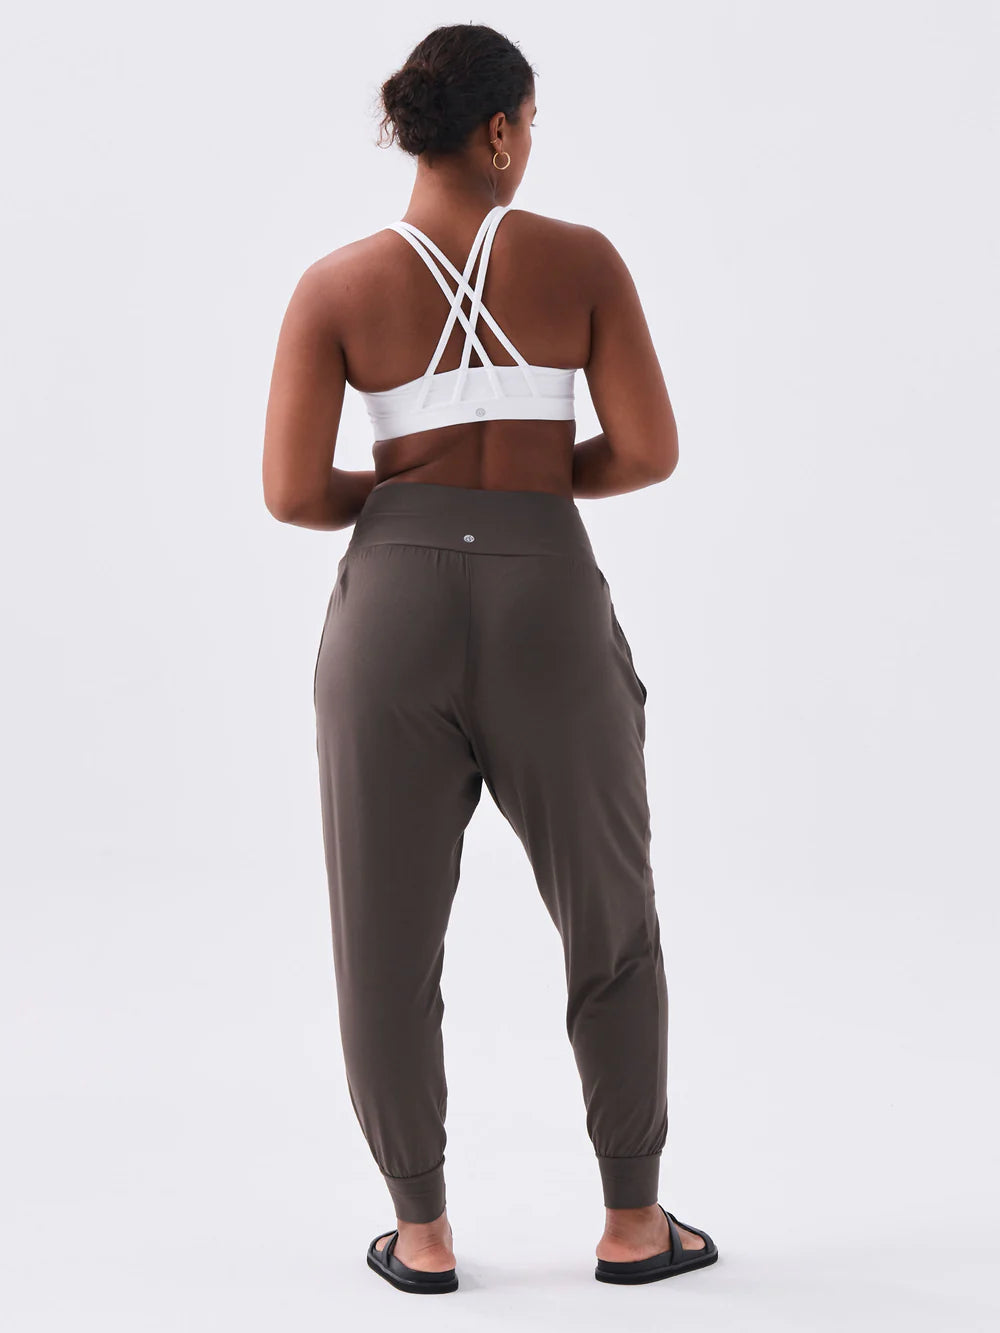 &quot;Unwind in style with our super soft brown pants. Designed for yoga and cozy lounging. Get yours today!&quot;